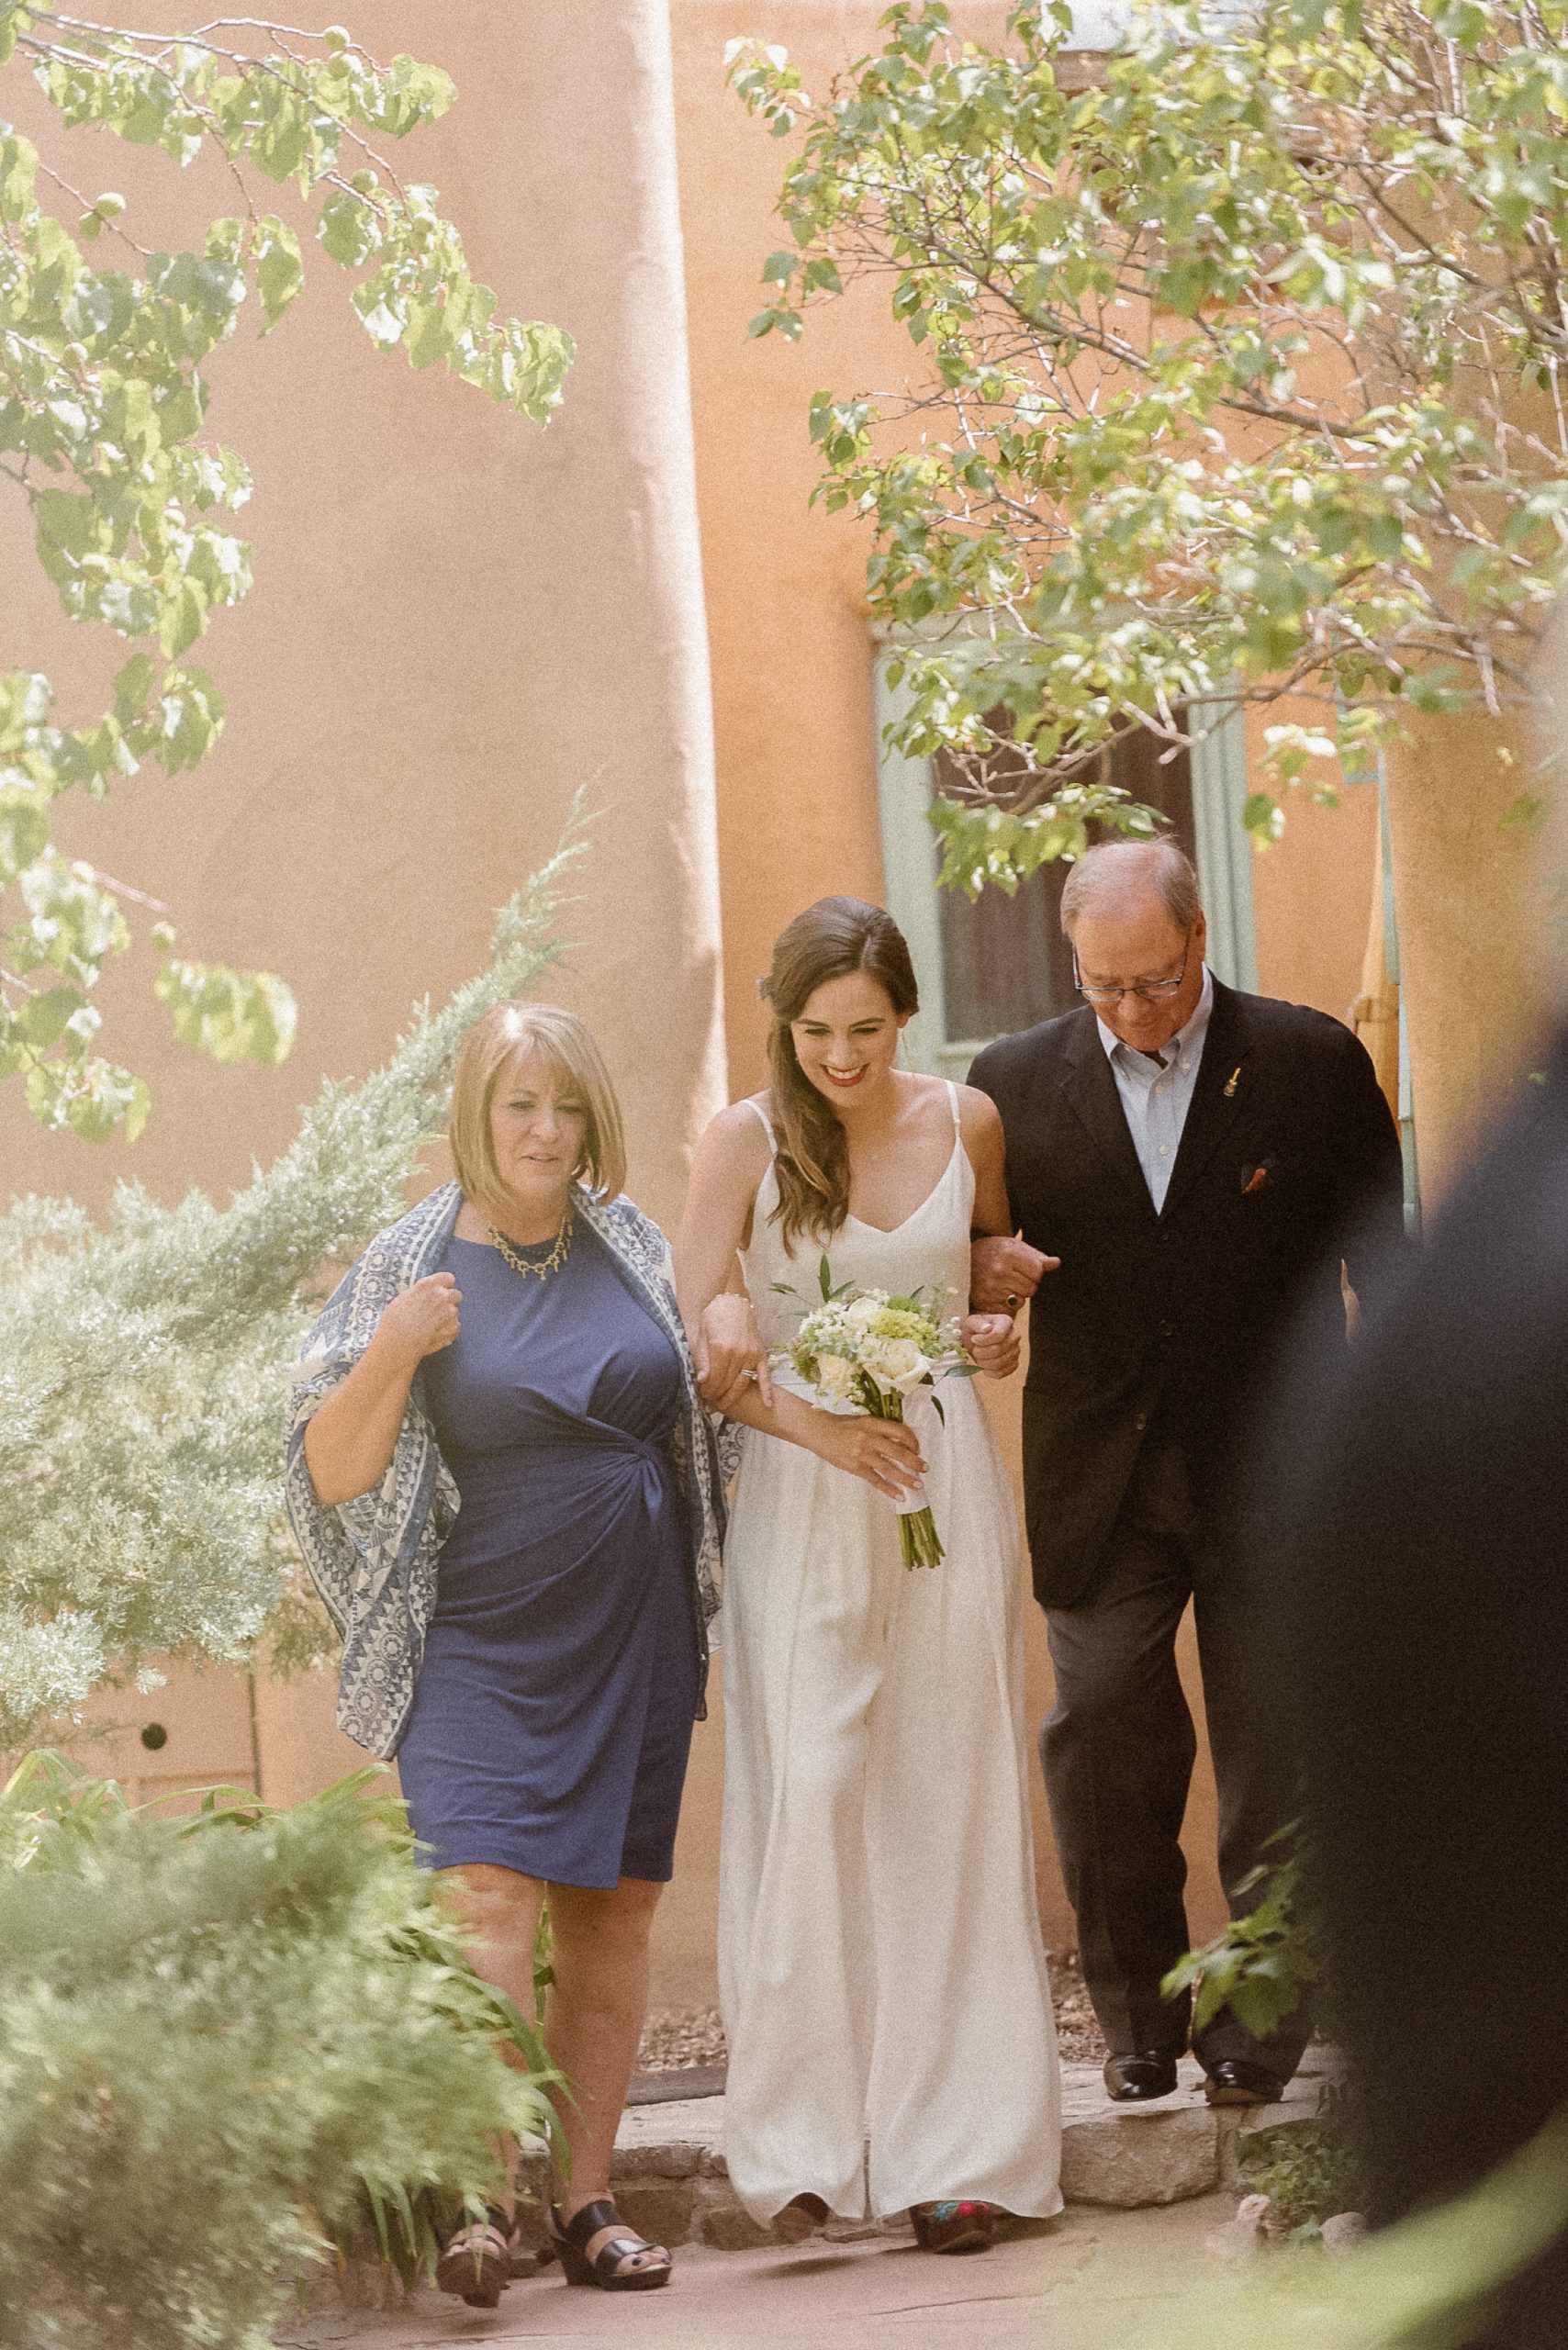 Bride walking down the aisle with her parents for her elopement | Santa Fe lesbian elopement photos at Inn of the Turquoise Bear in Santa Fe, New Mexico | Santa Fe lesbian elopement | Santa Fe elopement photographer | Santa Fe wedding | LGBTQ elopement | Photo by Denver Elopement Photographer Ashley Joyce Photography, copyright 2021